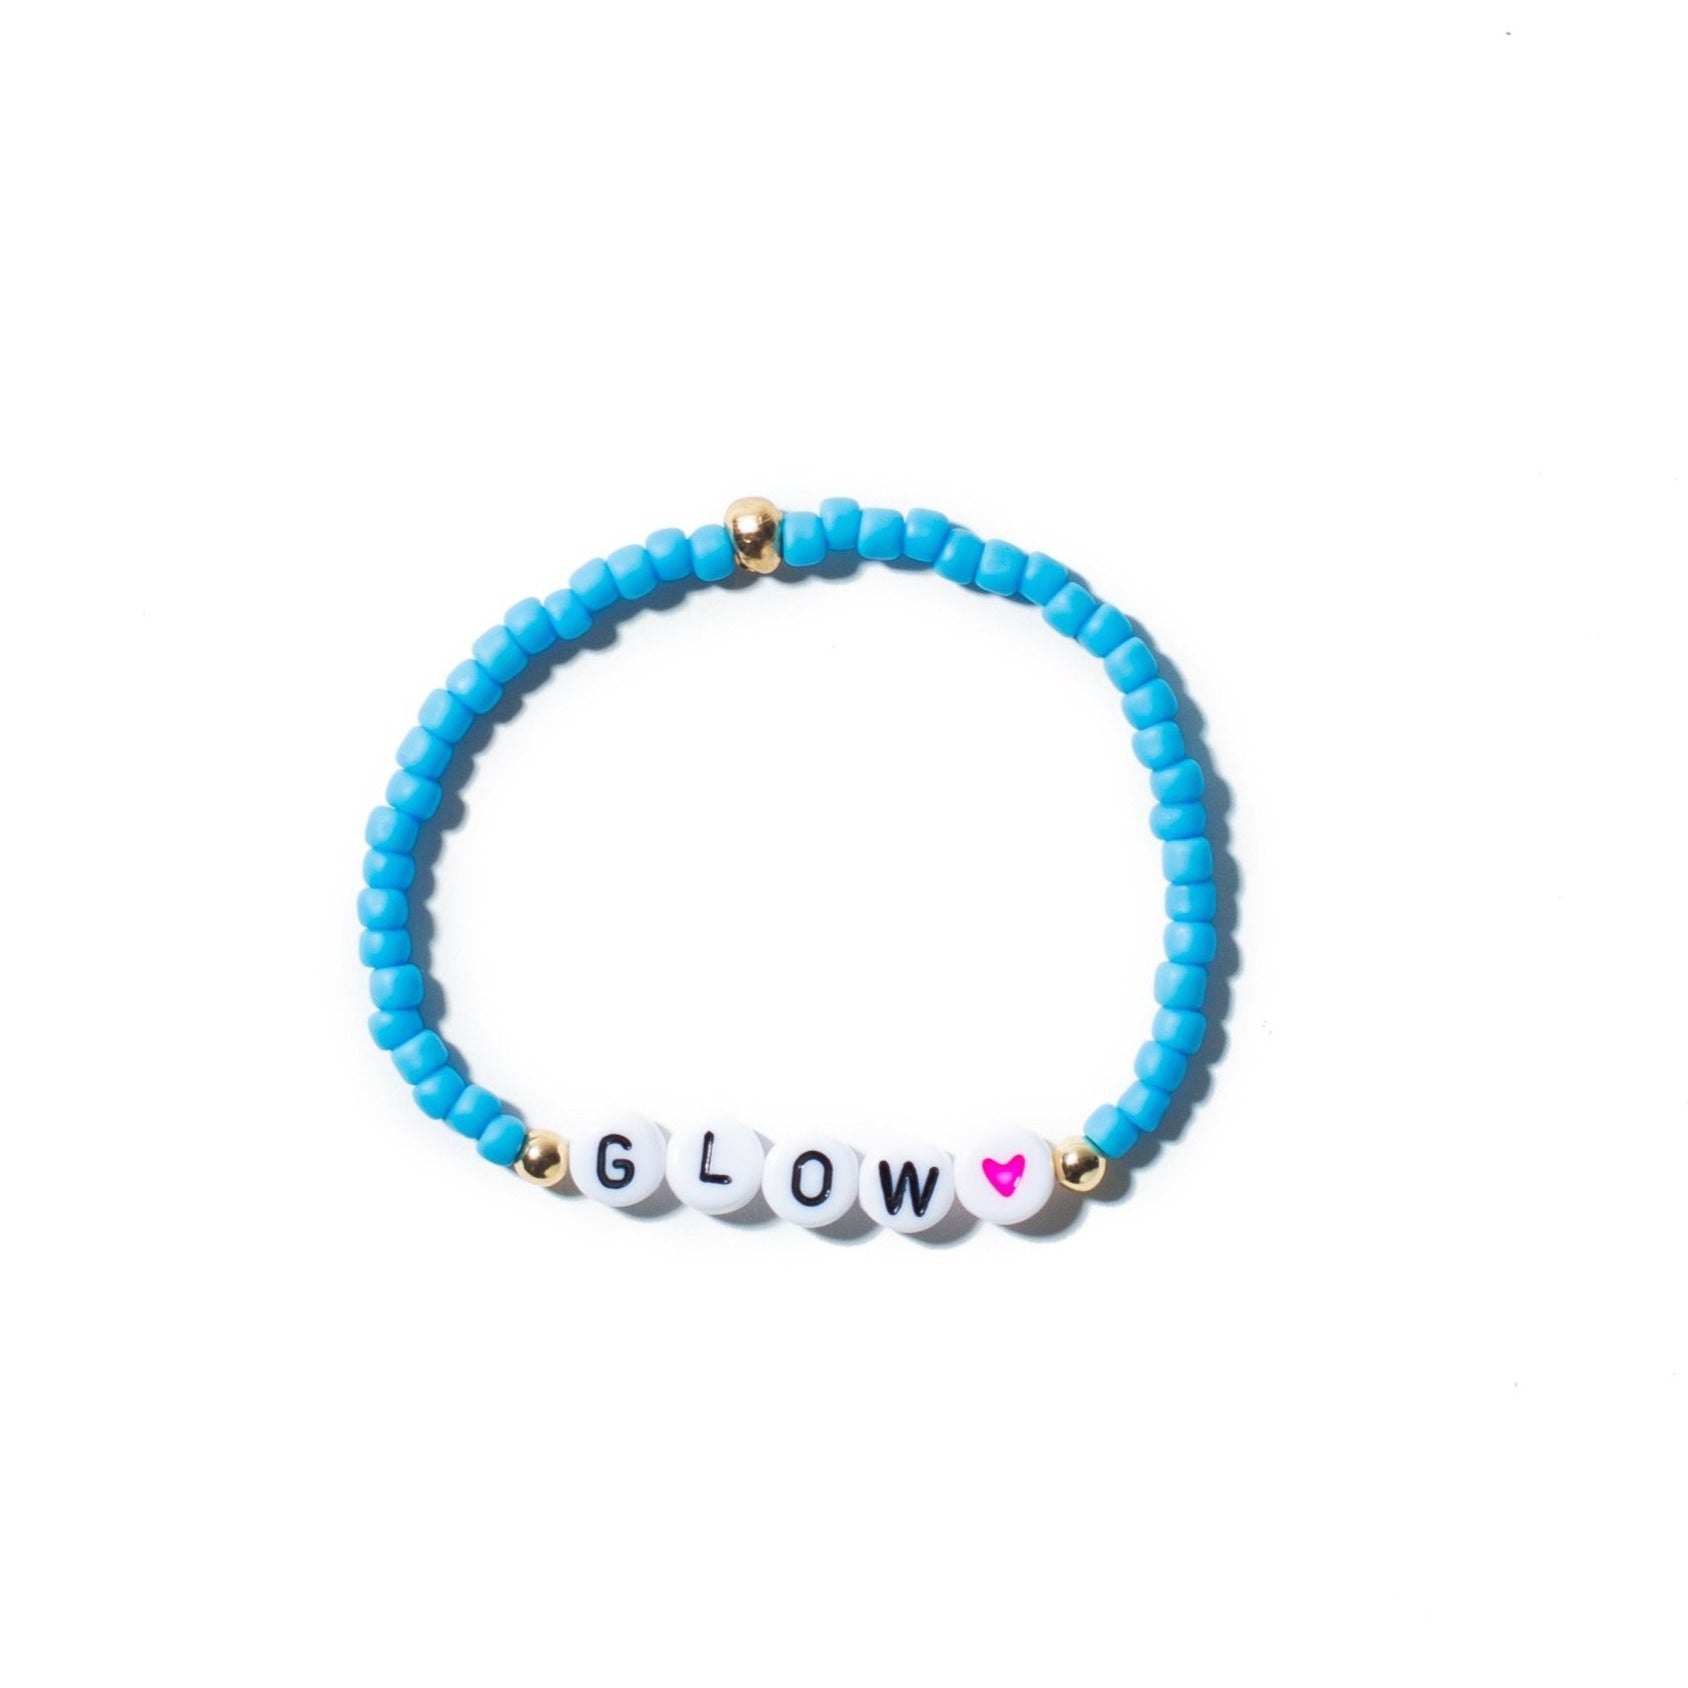 Colorful Personalized Name or Word Beaded Stretch Bracelet. 10 Letters Max